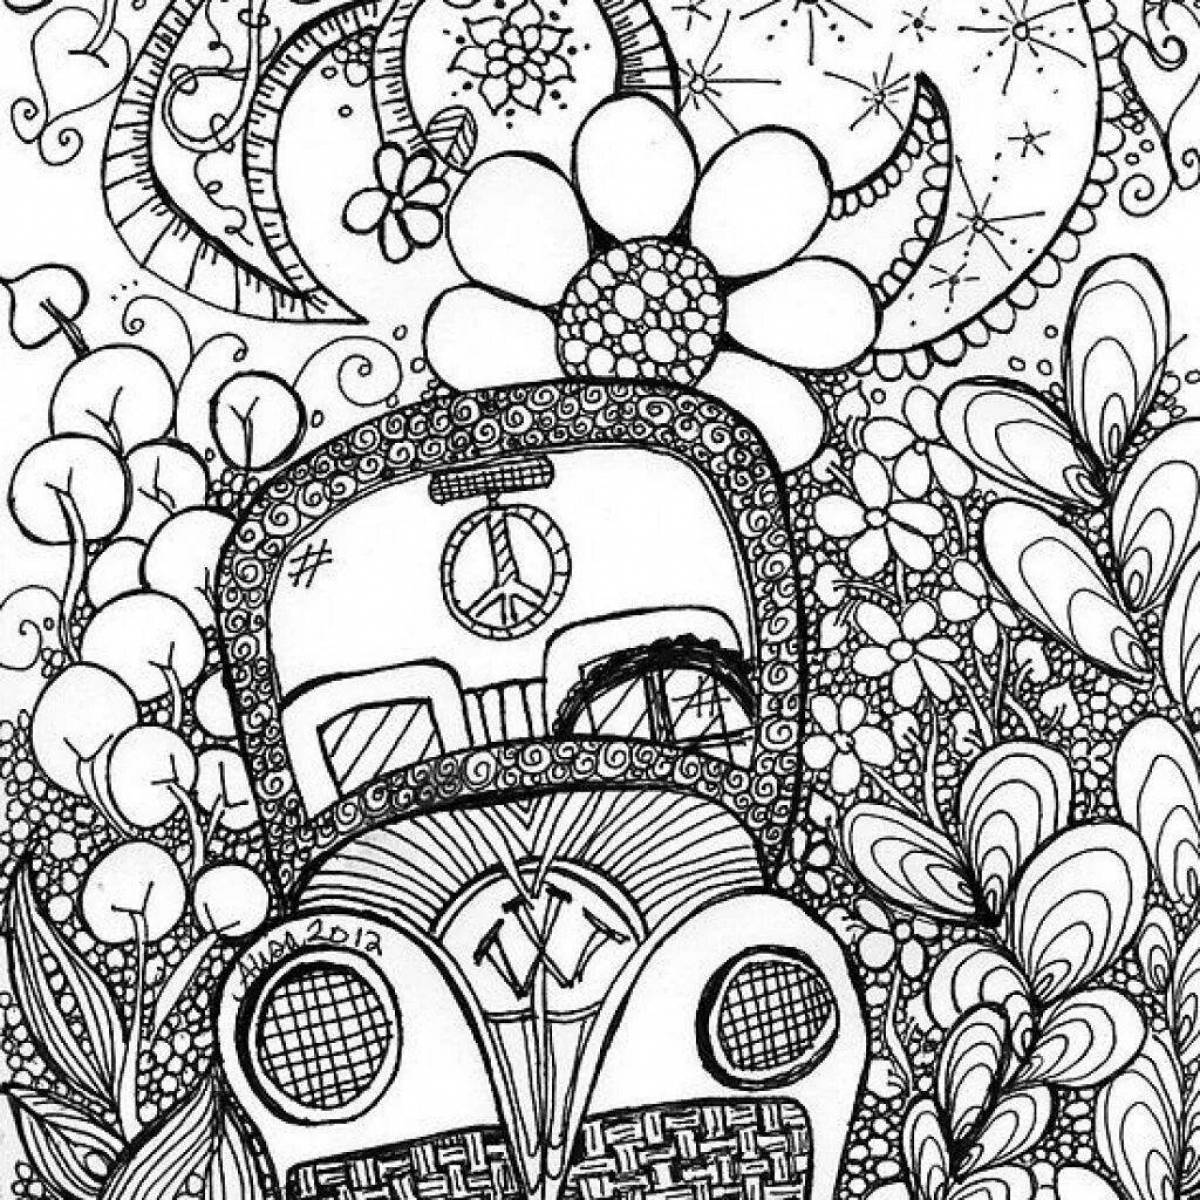 Amazing coloring book is the coolest in the world